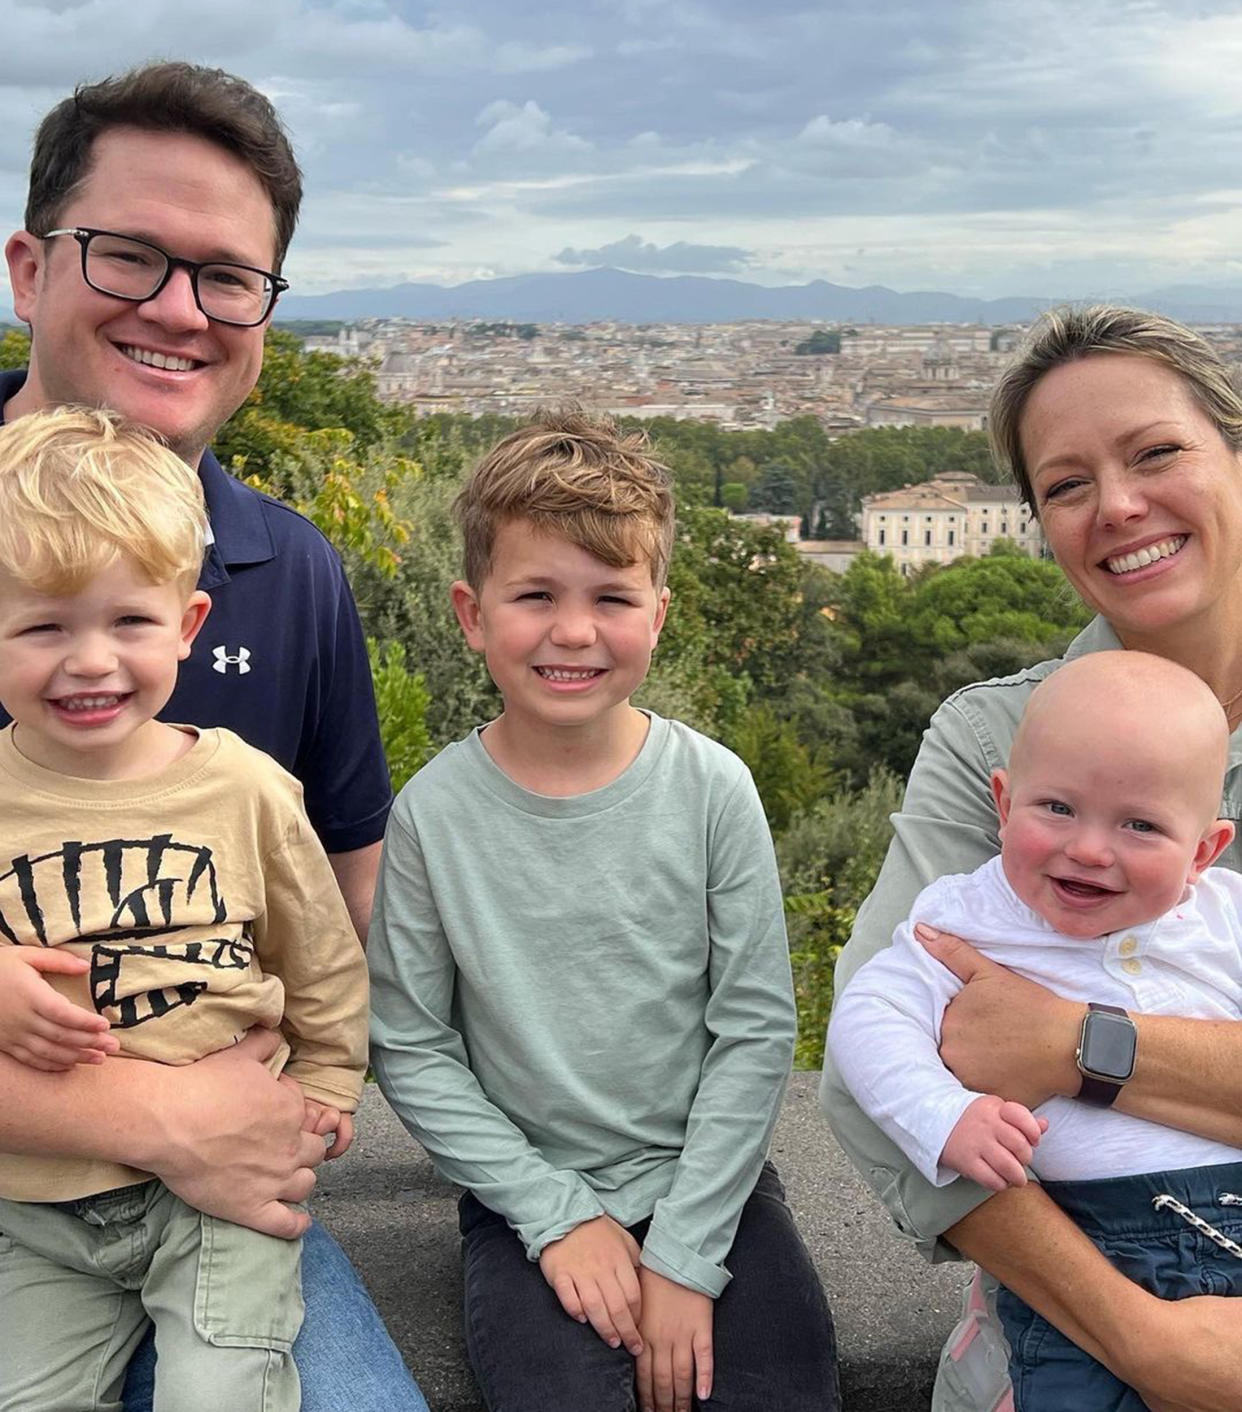 The couple share three kids, Calvin (center), Oliver, (left) and Russell. (@dylandreyernbc via Instagram)